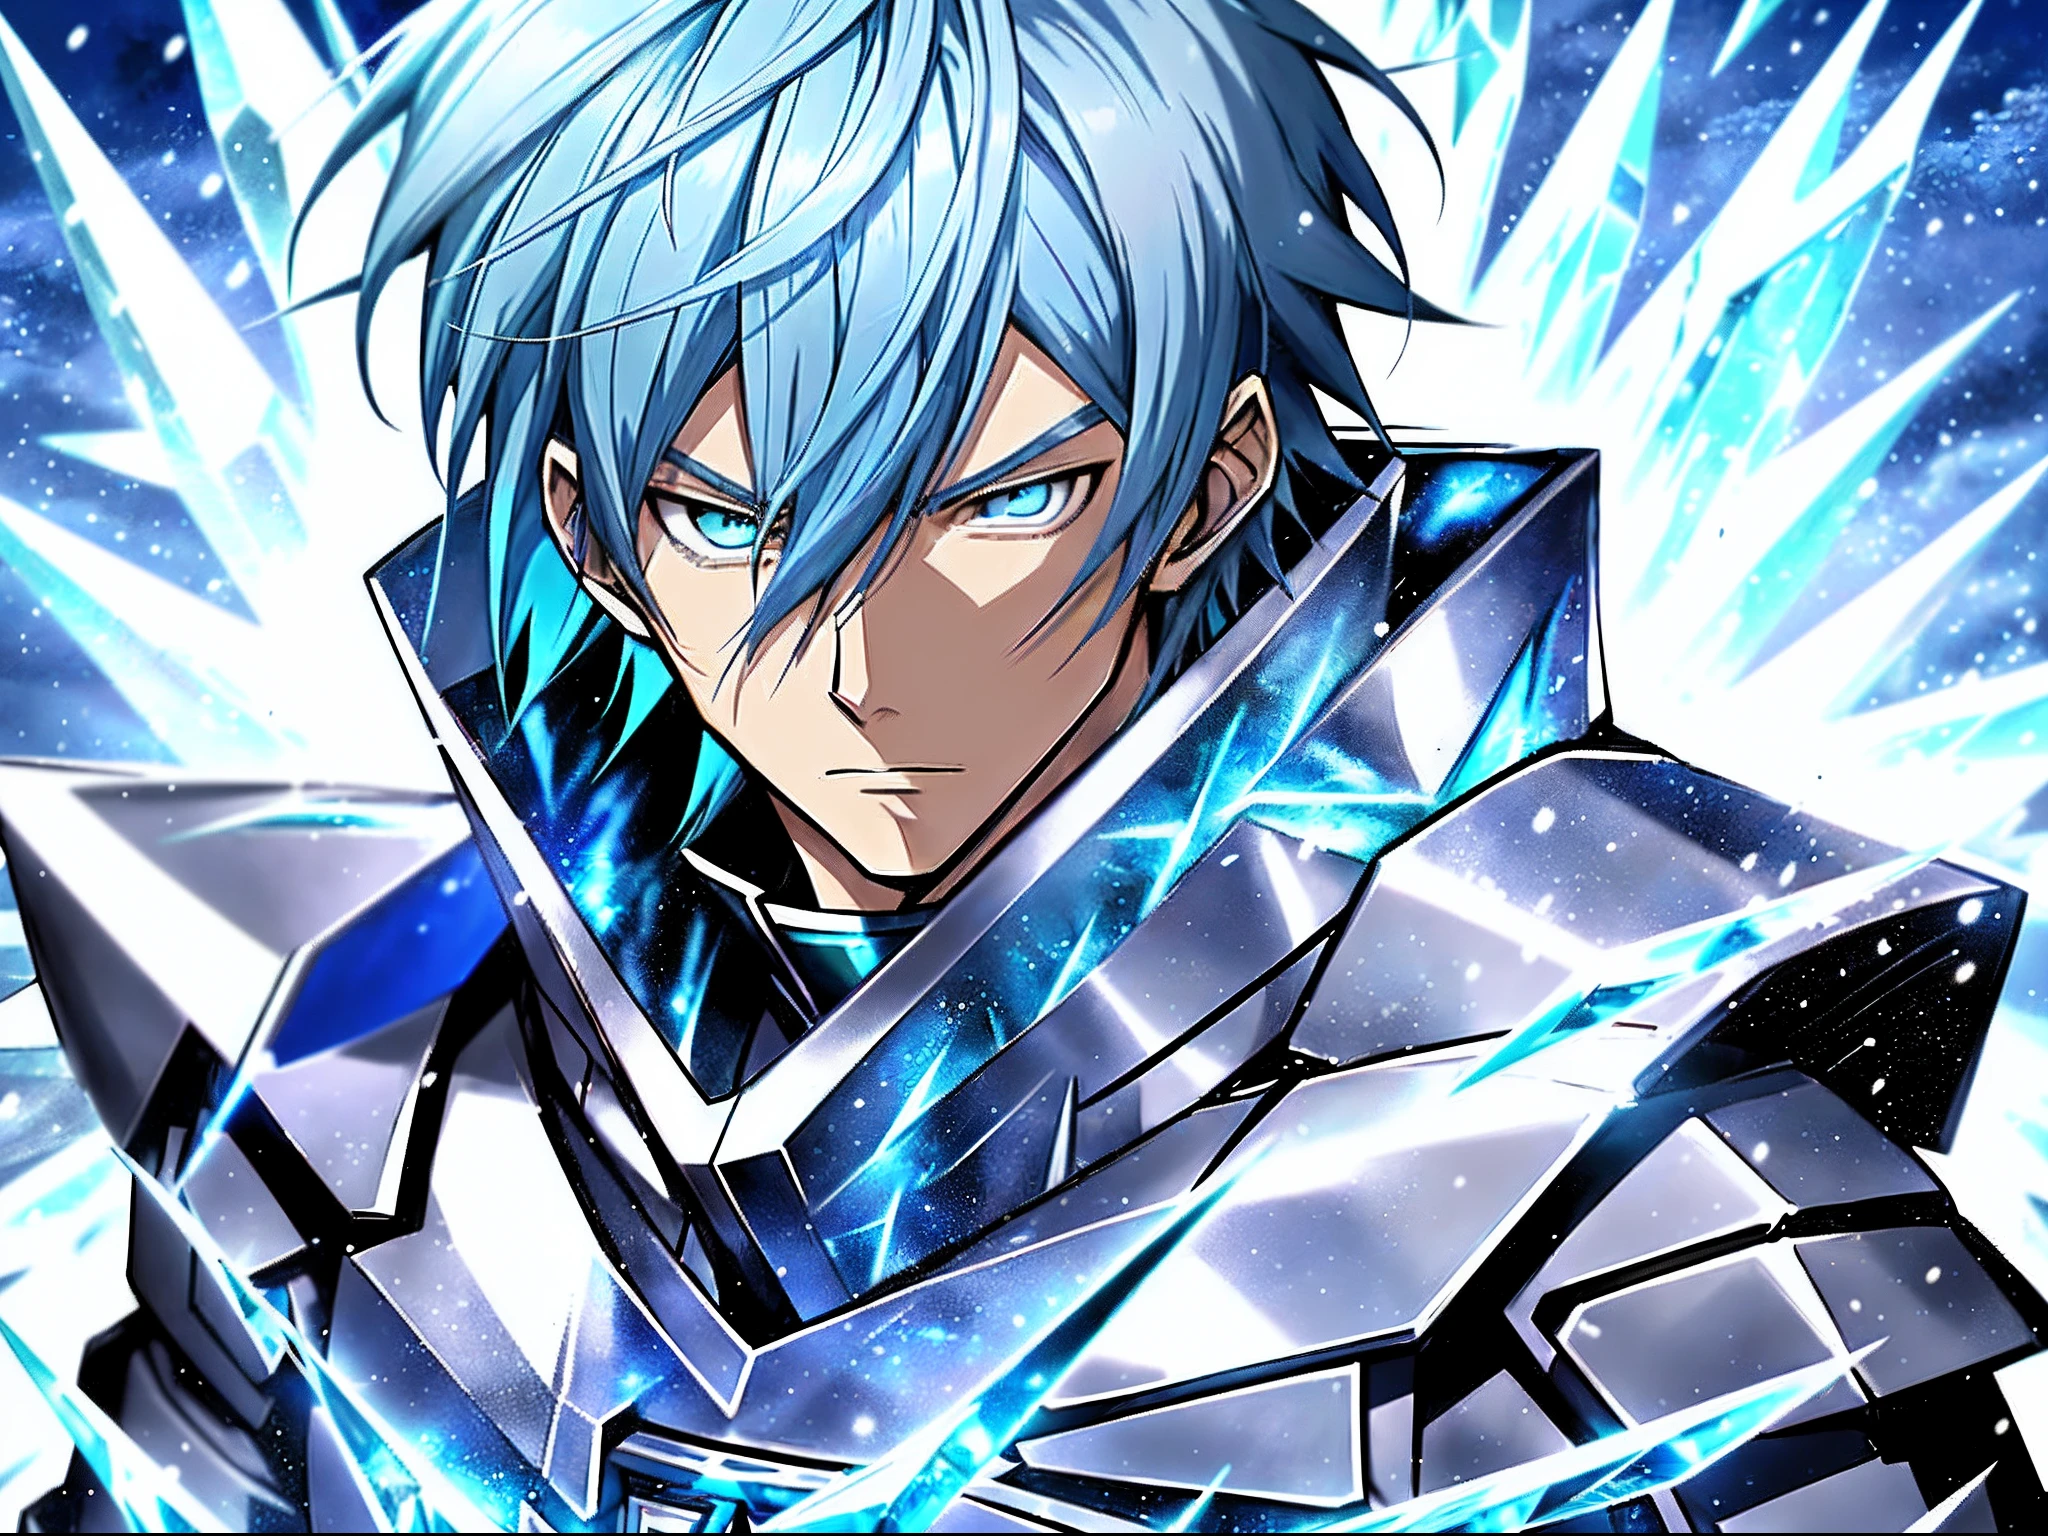 Anime characters with blue hair and blue eyes in snowy scenes, Ice Mage, Tall  anime guy with blue eyes, freezing blue skin, Key anime art - SeaArt AI